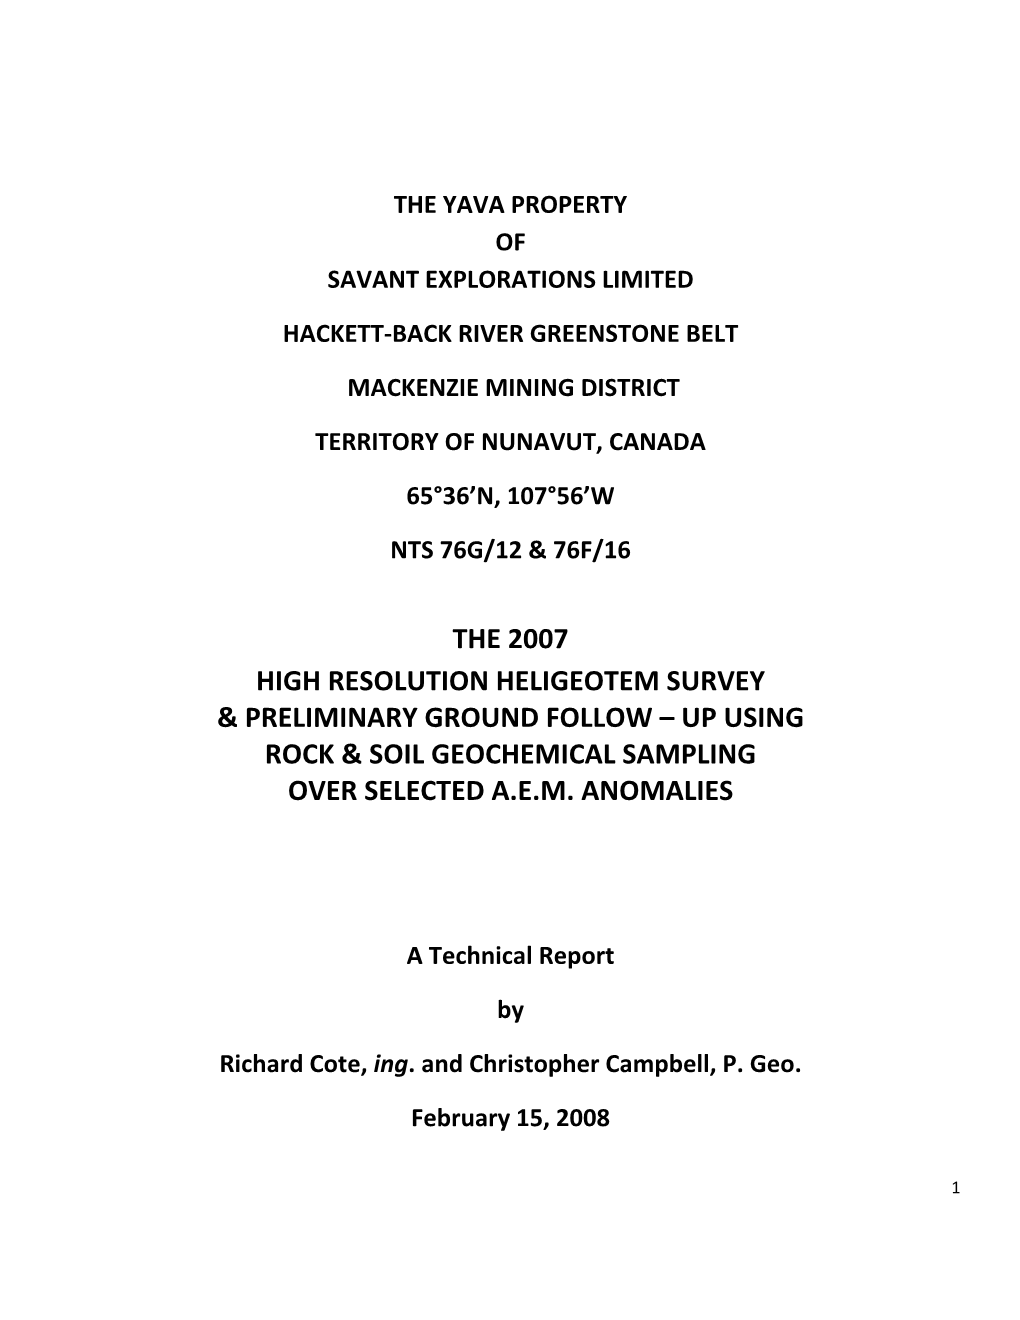 The NI 43-101 Report Is Available Here